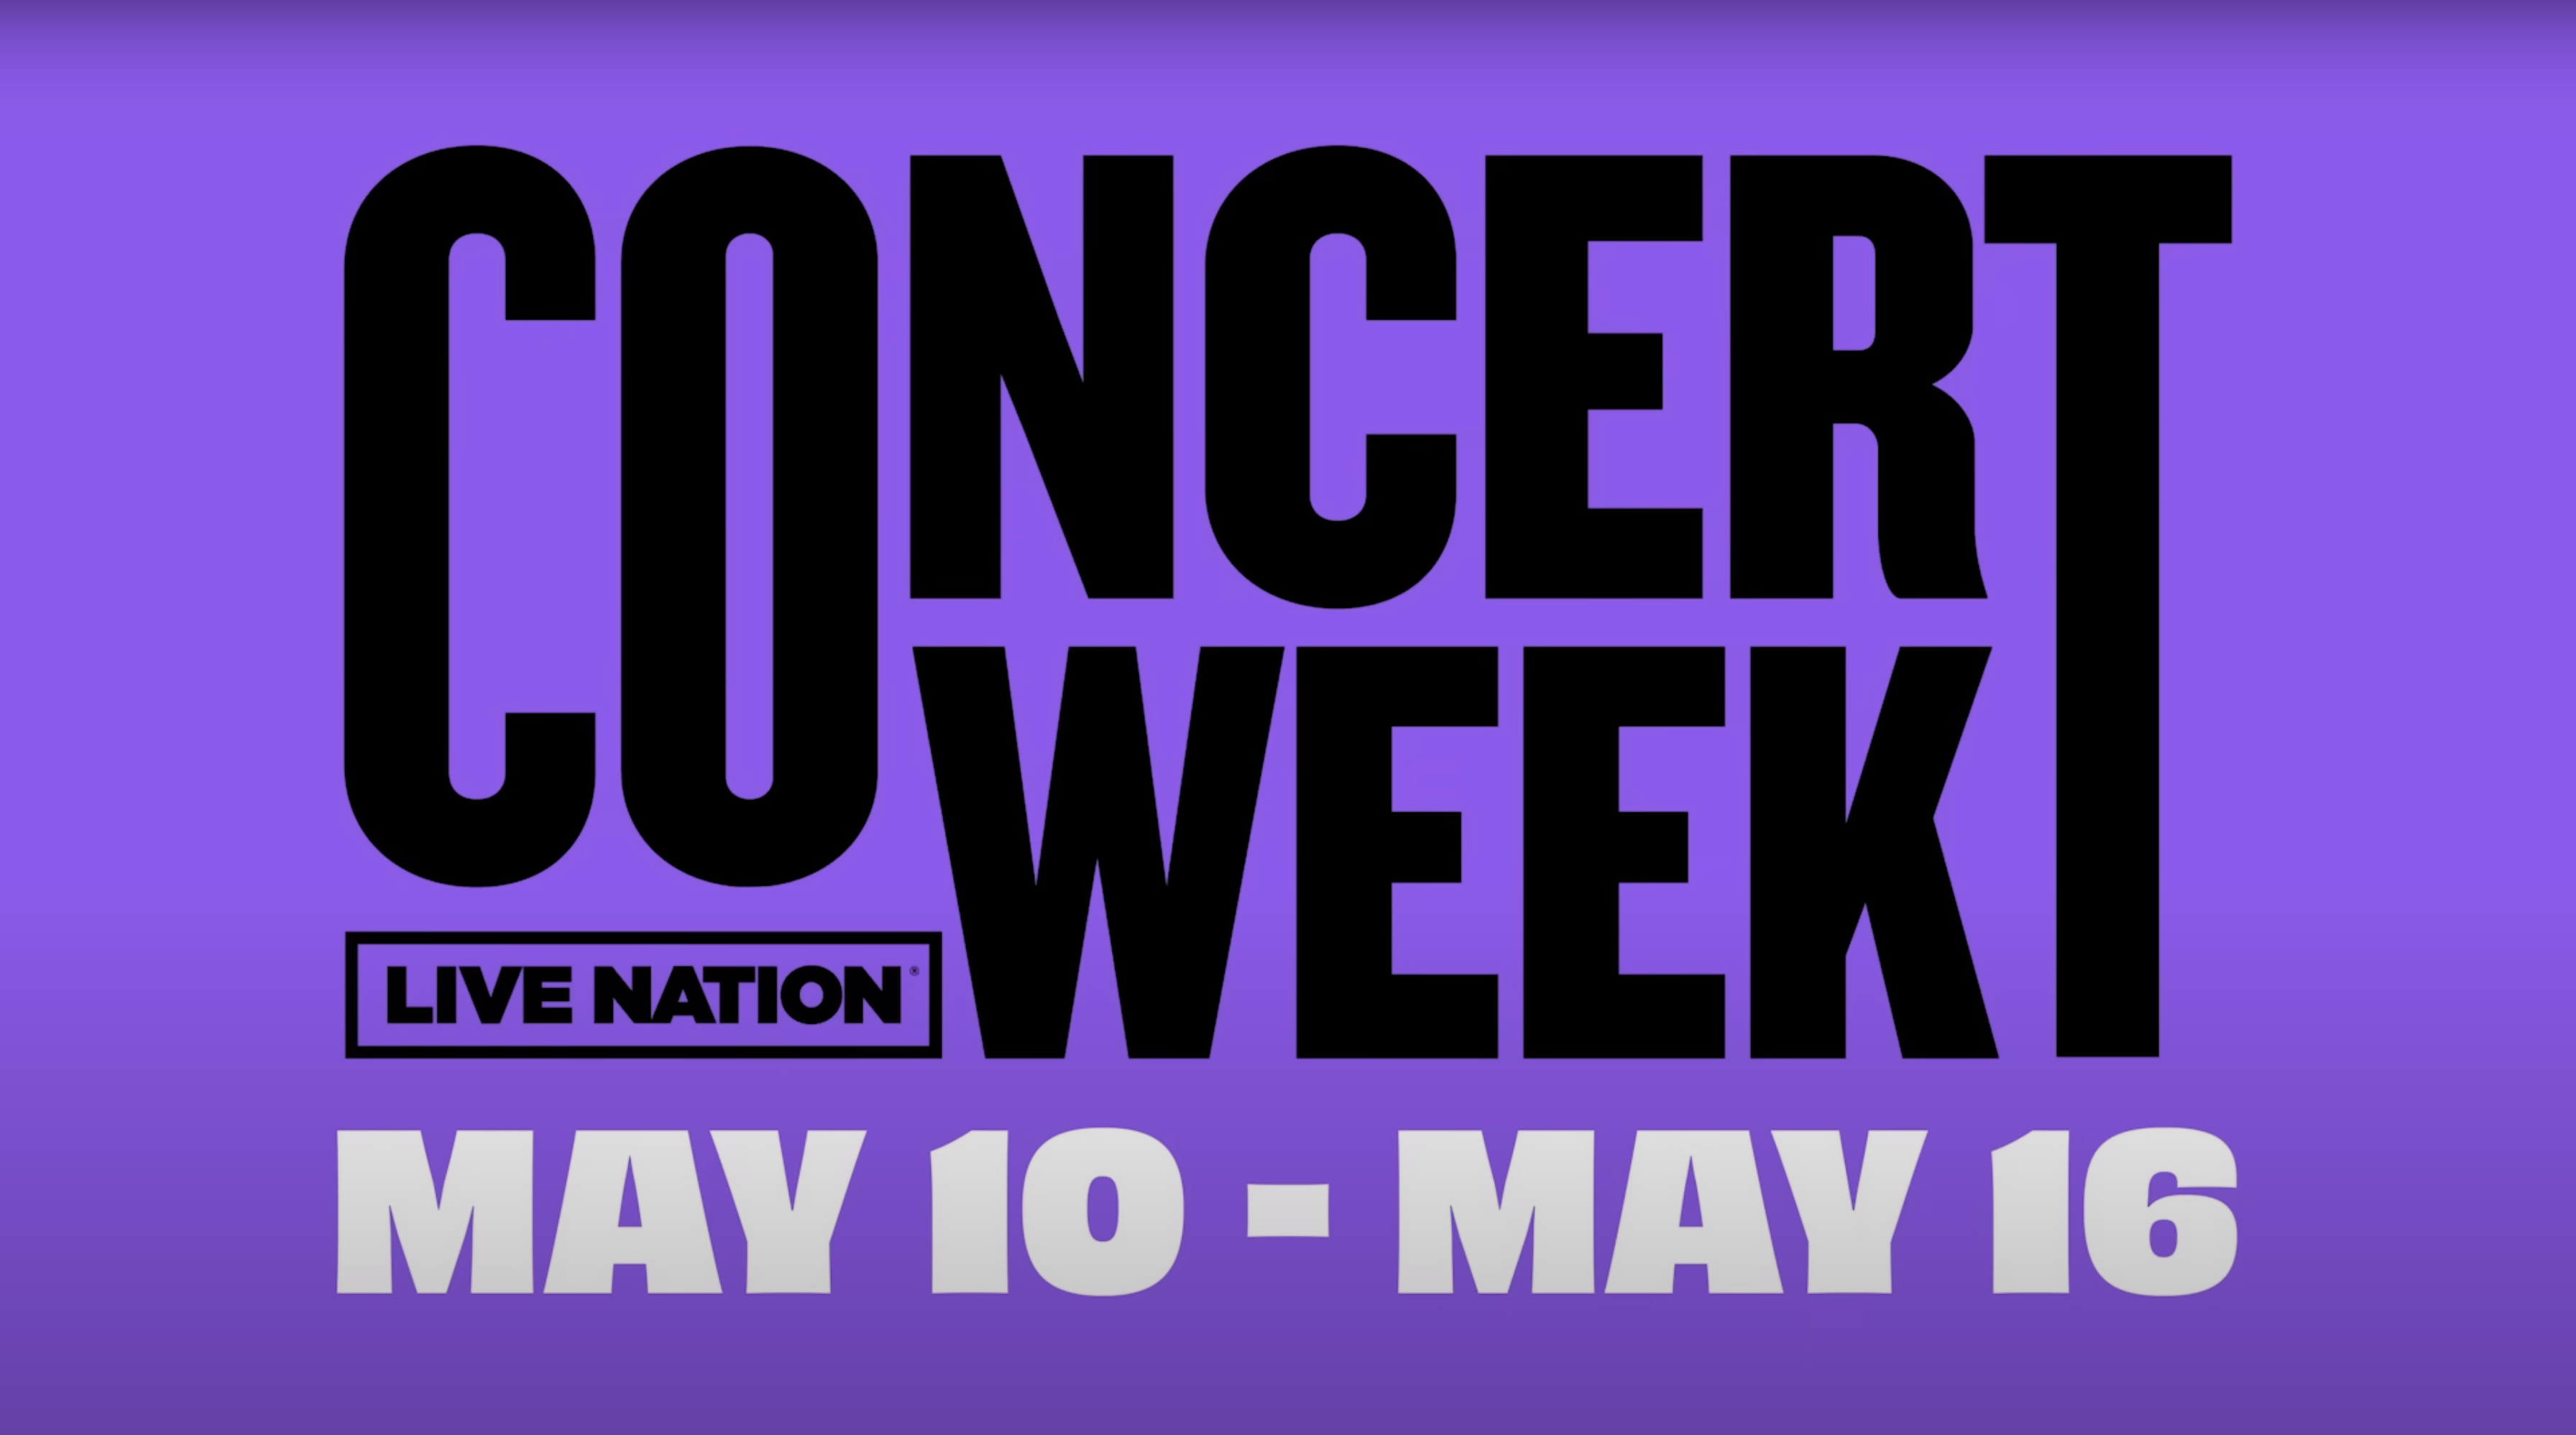 Live Nation Concert Week sale offering 25 tickets for Michigan shows